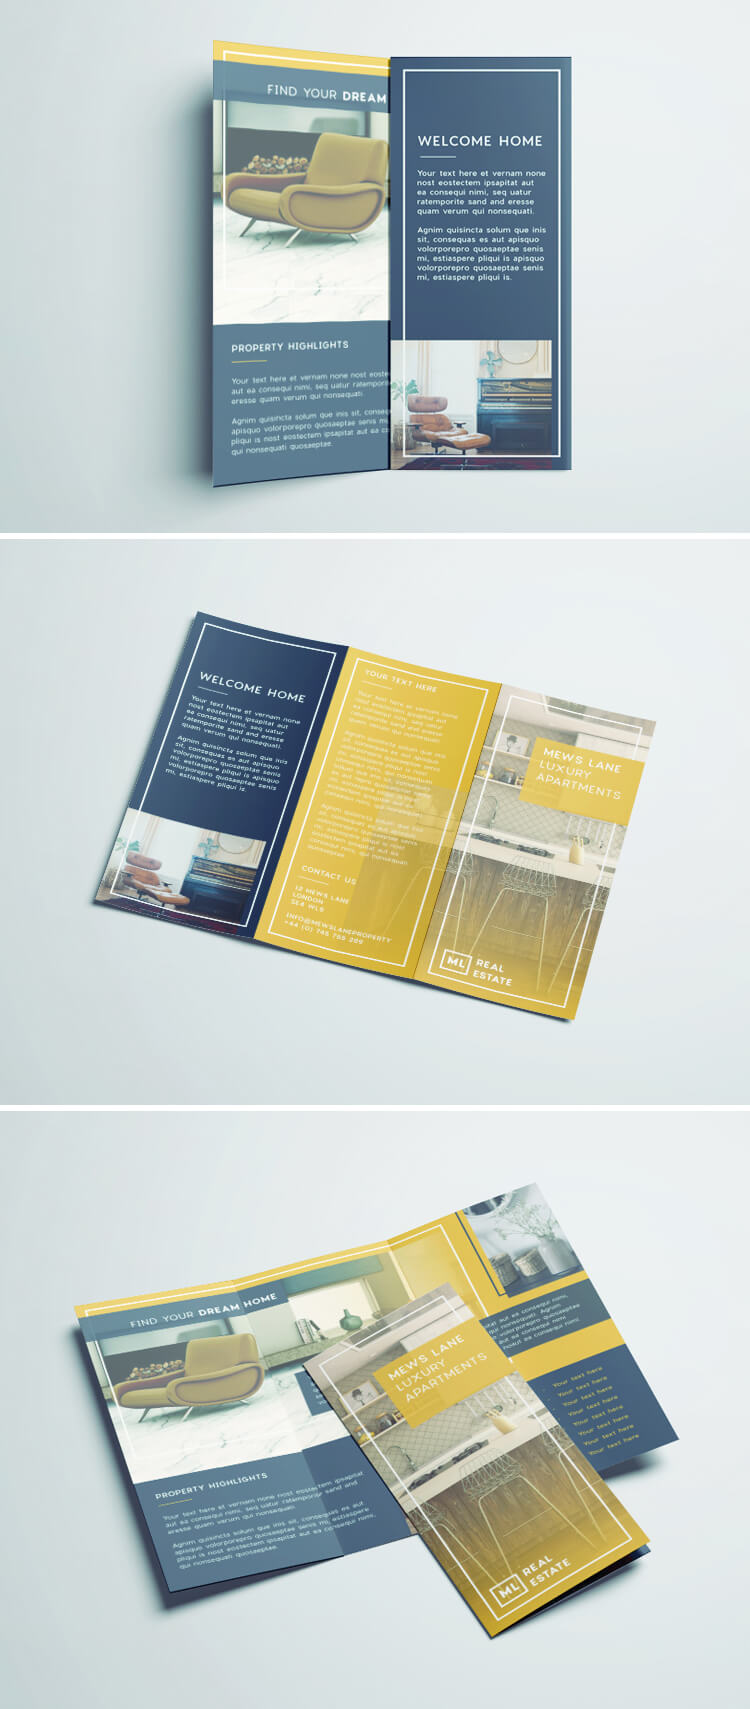 Real estate flyer free InDesign template - inside view of tri-fold real estate flyer with modern apartment